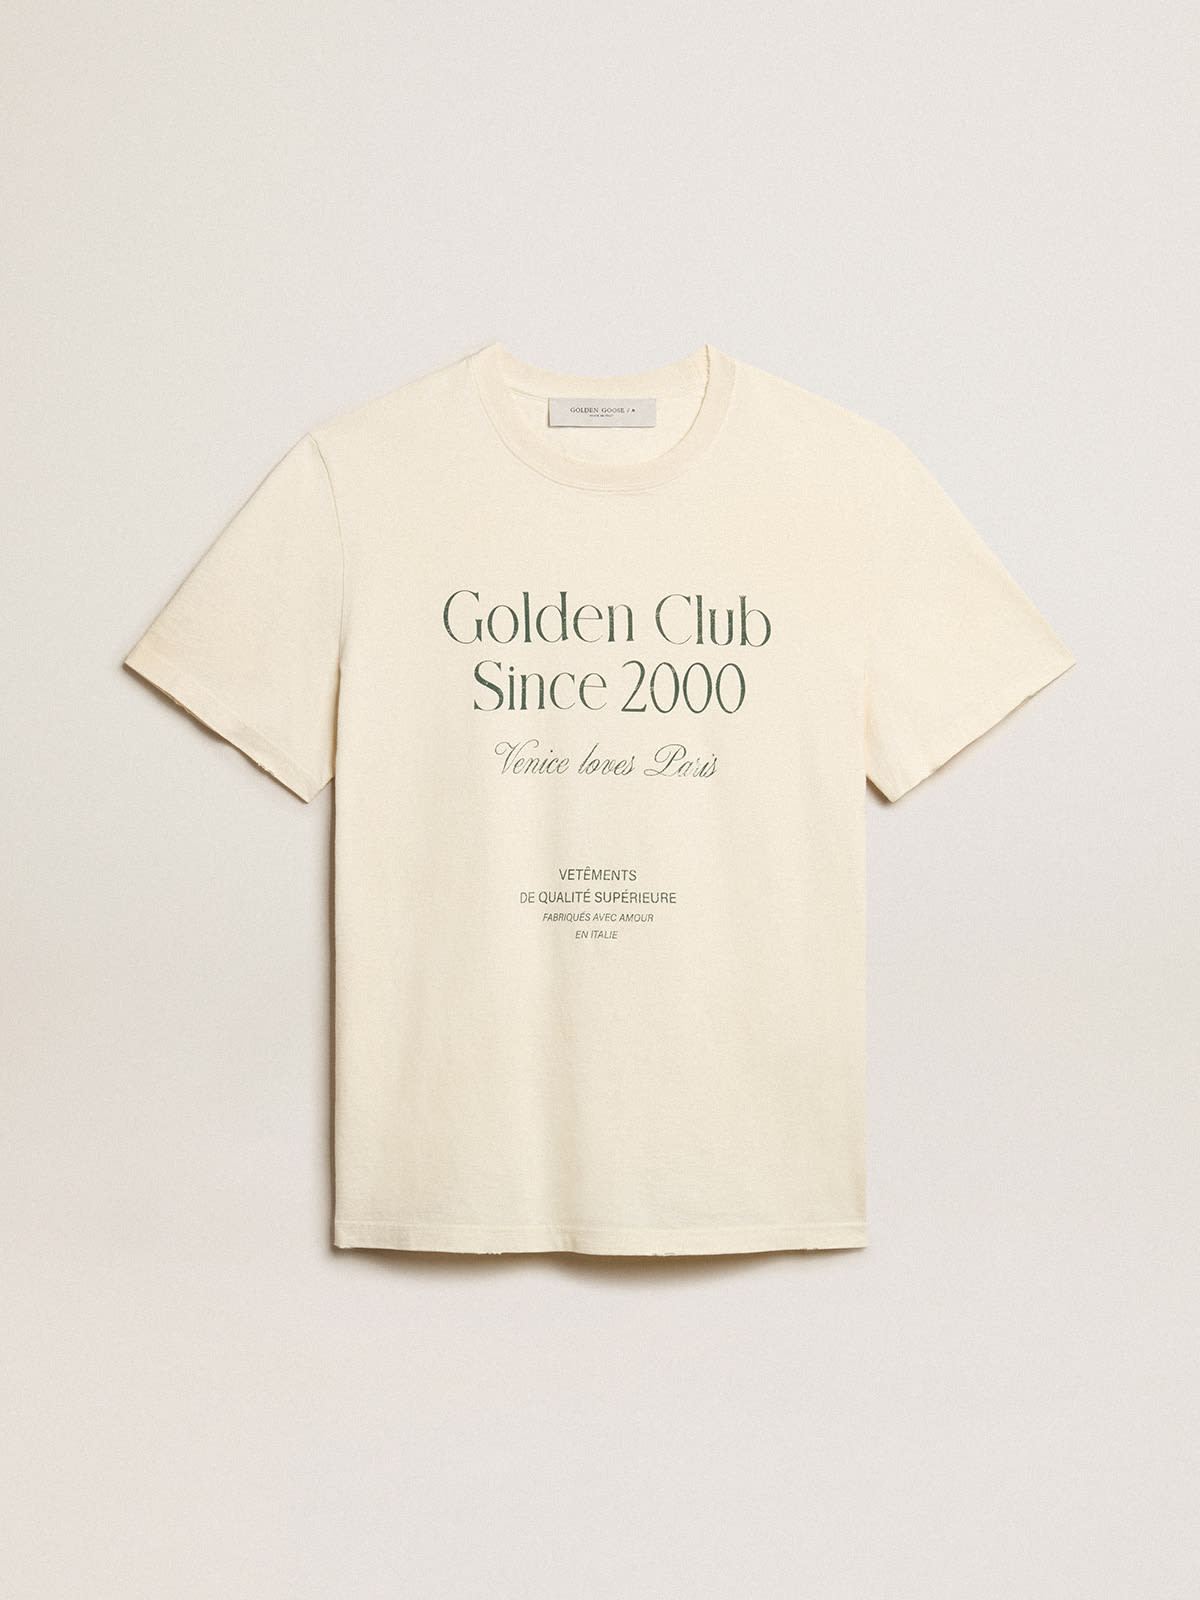 Golden Goose - Men’s cotton T-shirt in aged white with green lettering in 